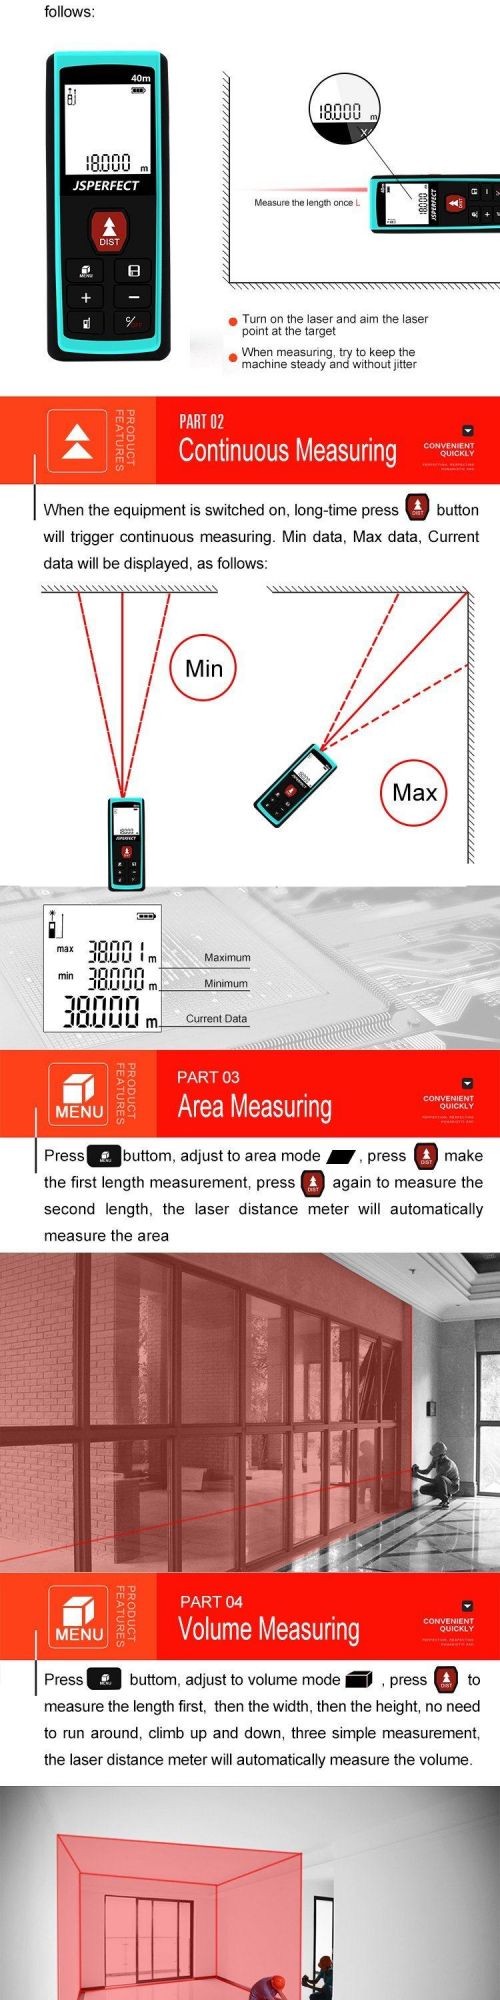 Quality Long Distance 40m Measuring Device Wholesale Suppliers for Laser Range Finder